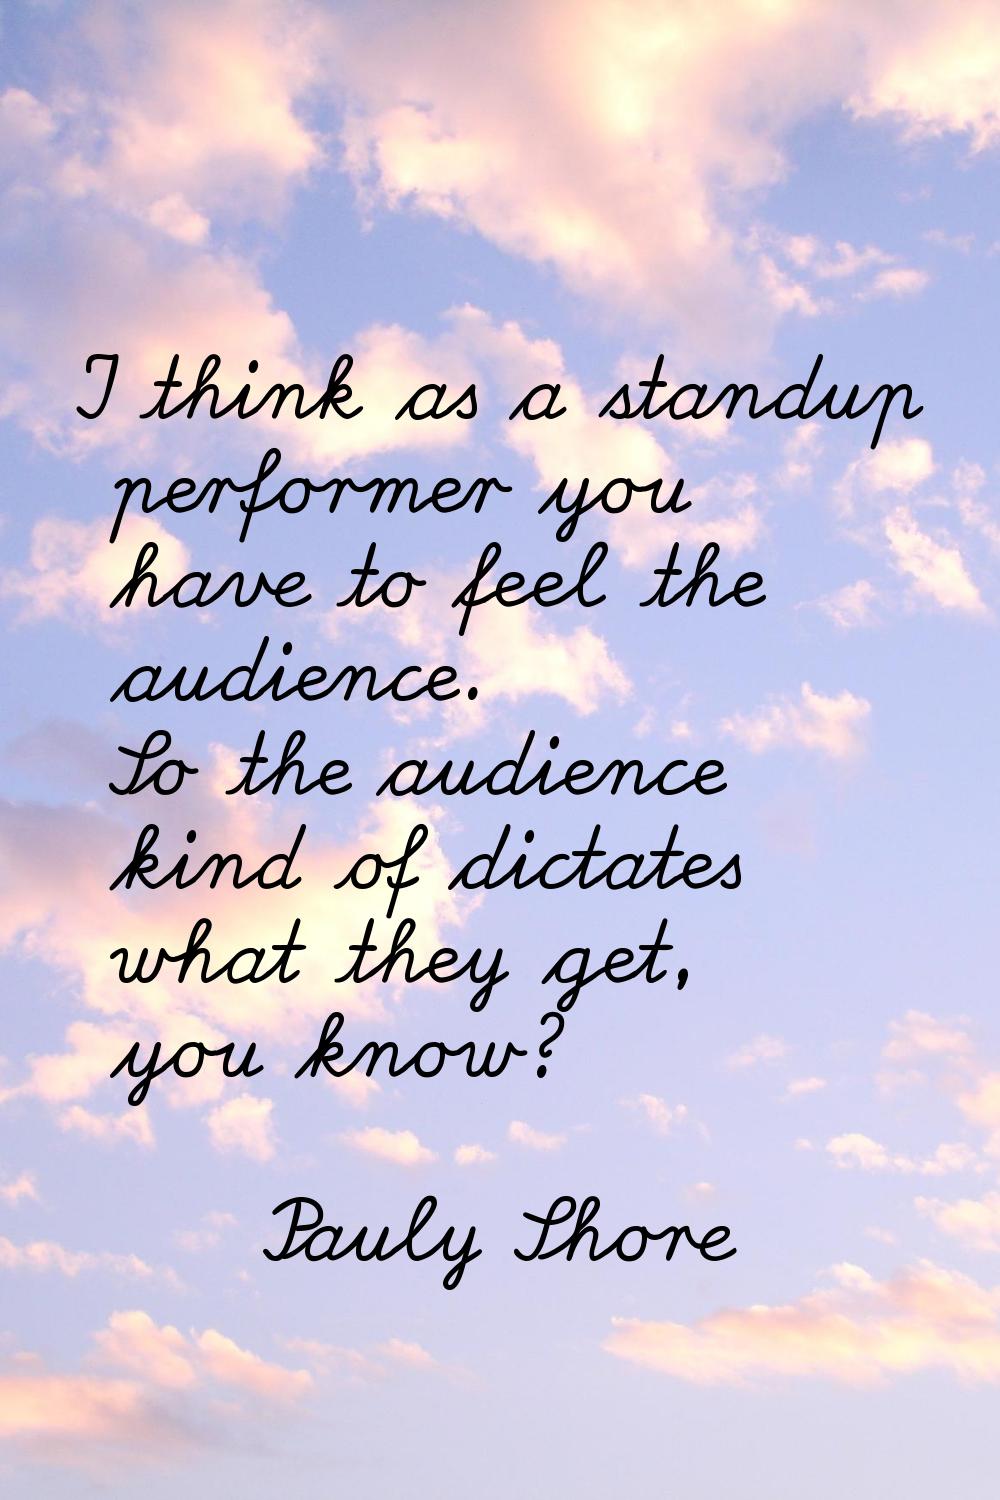 I think as a standup performer you have to feel the audience. So the audience kind of dictates what